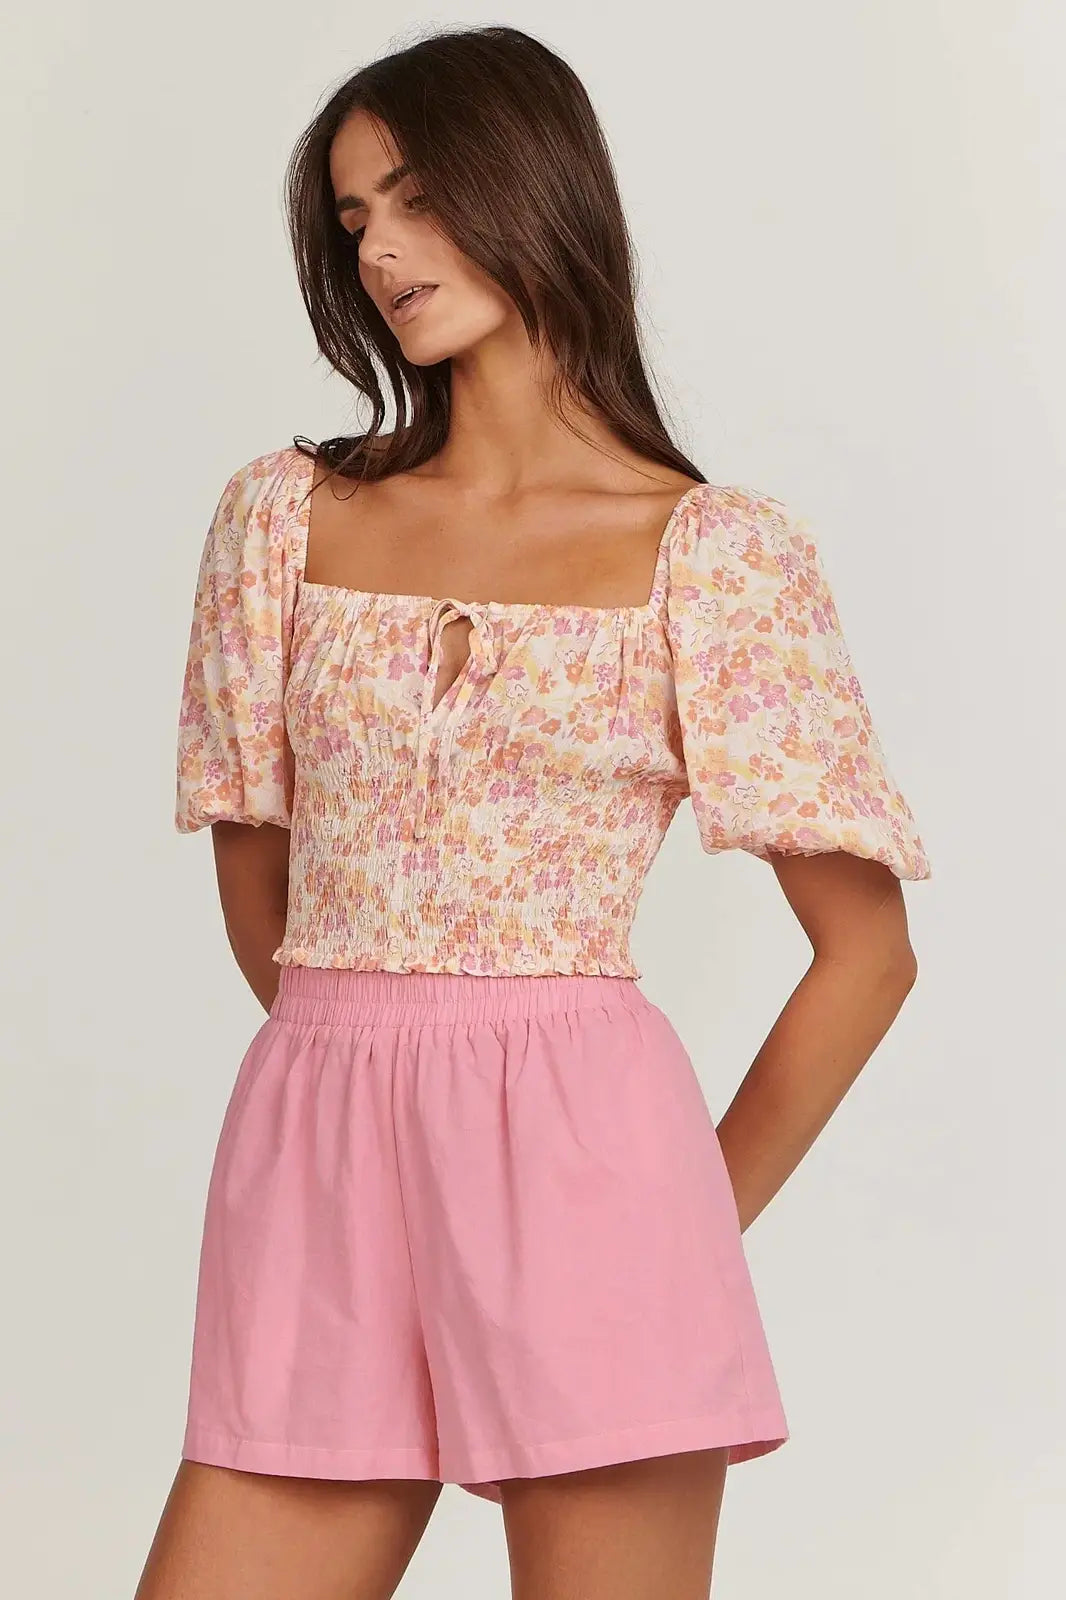 Charlie holiday audrey top